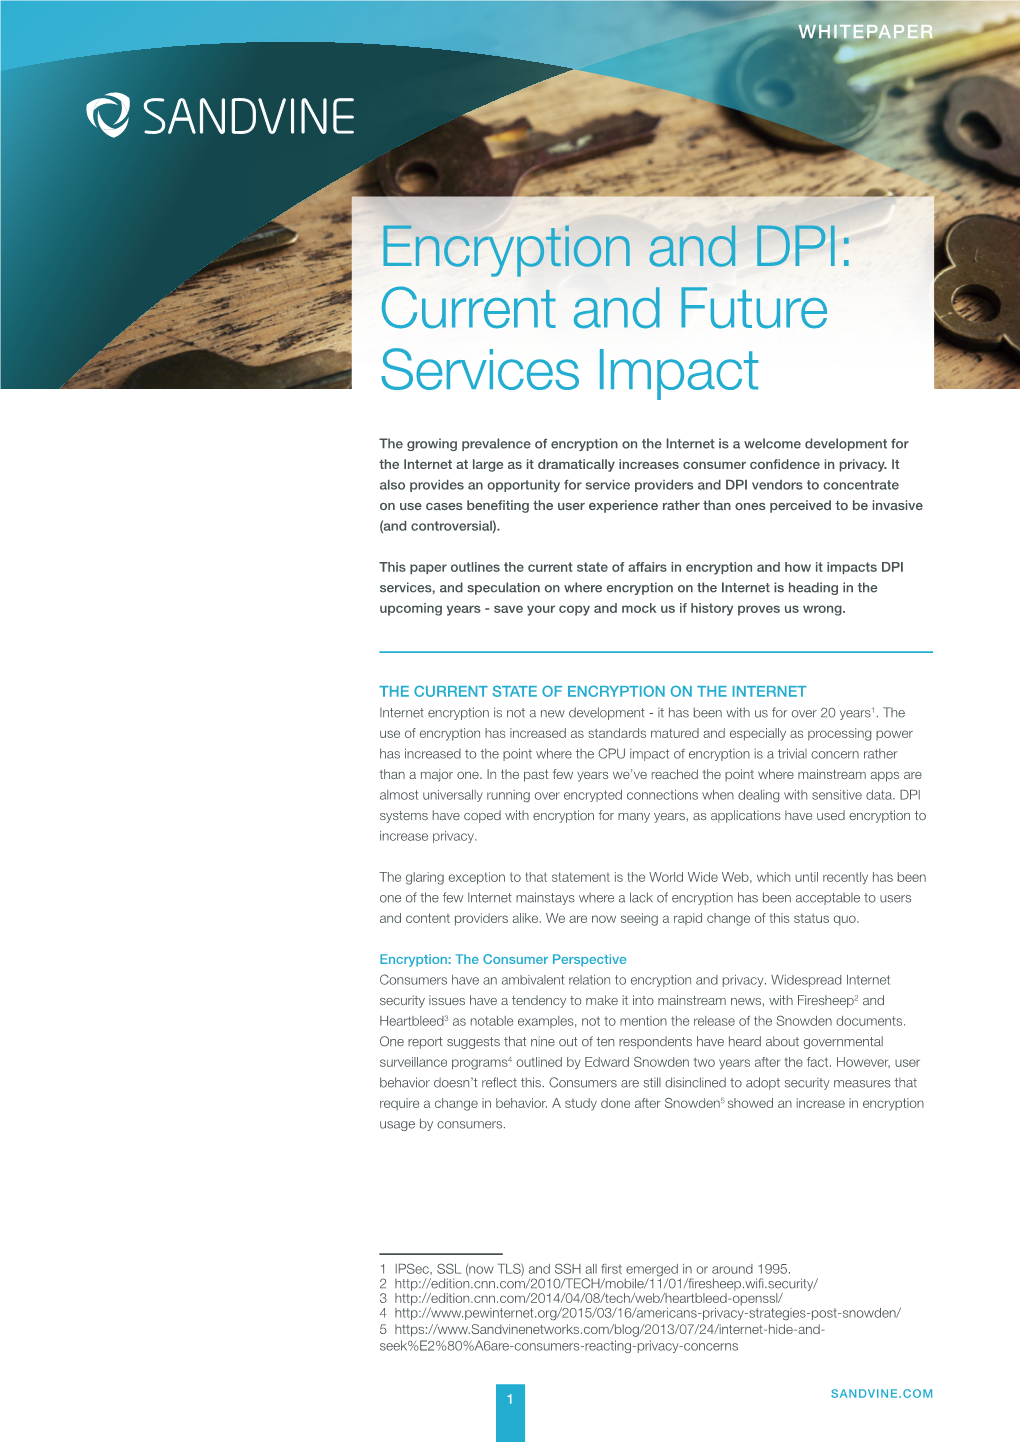 Encryption and DPI: Current and Future Services Impact